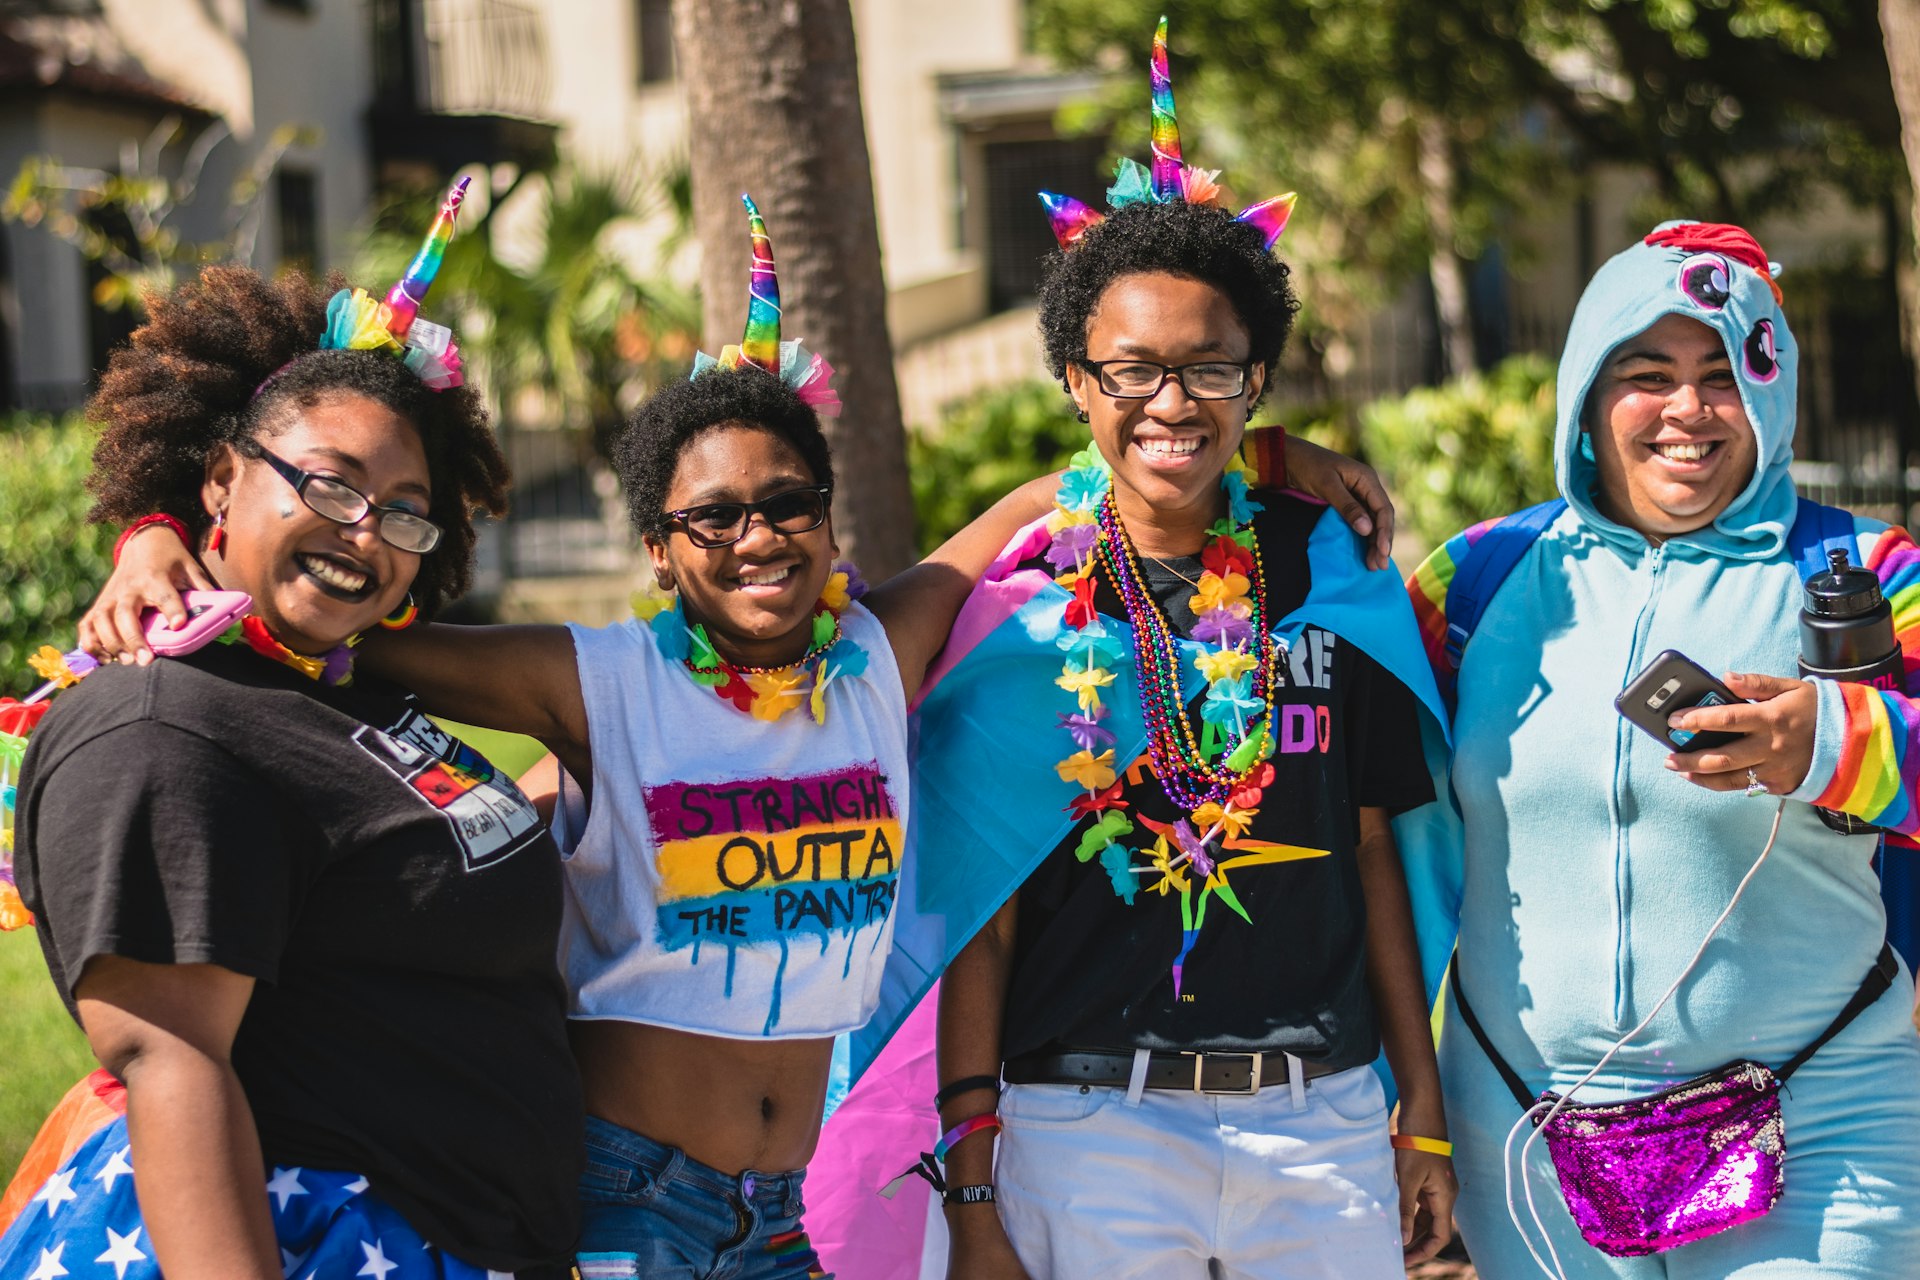 Four people dressed with rainbow-colored accessories smile for the camera